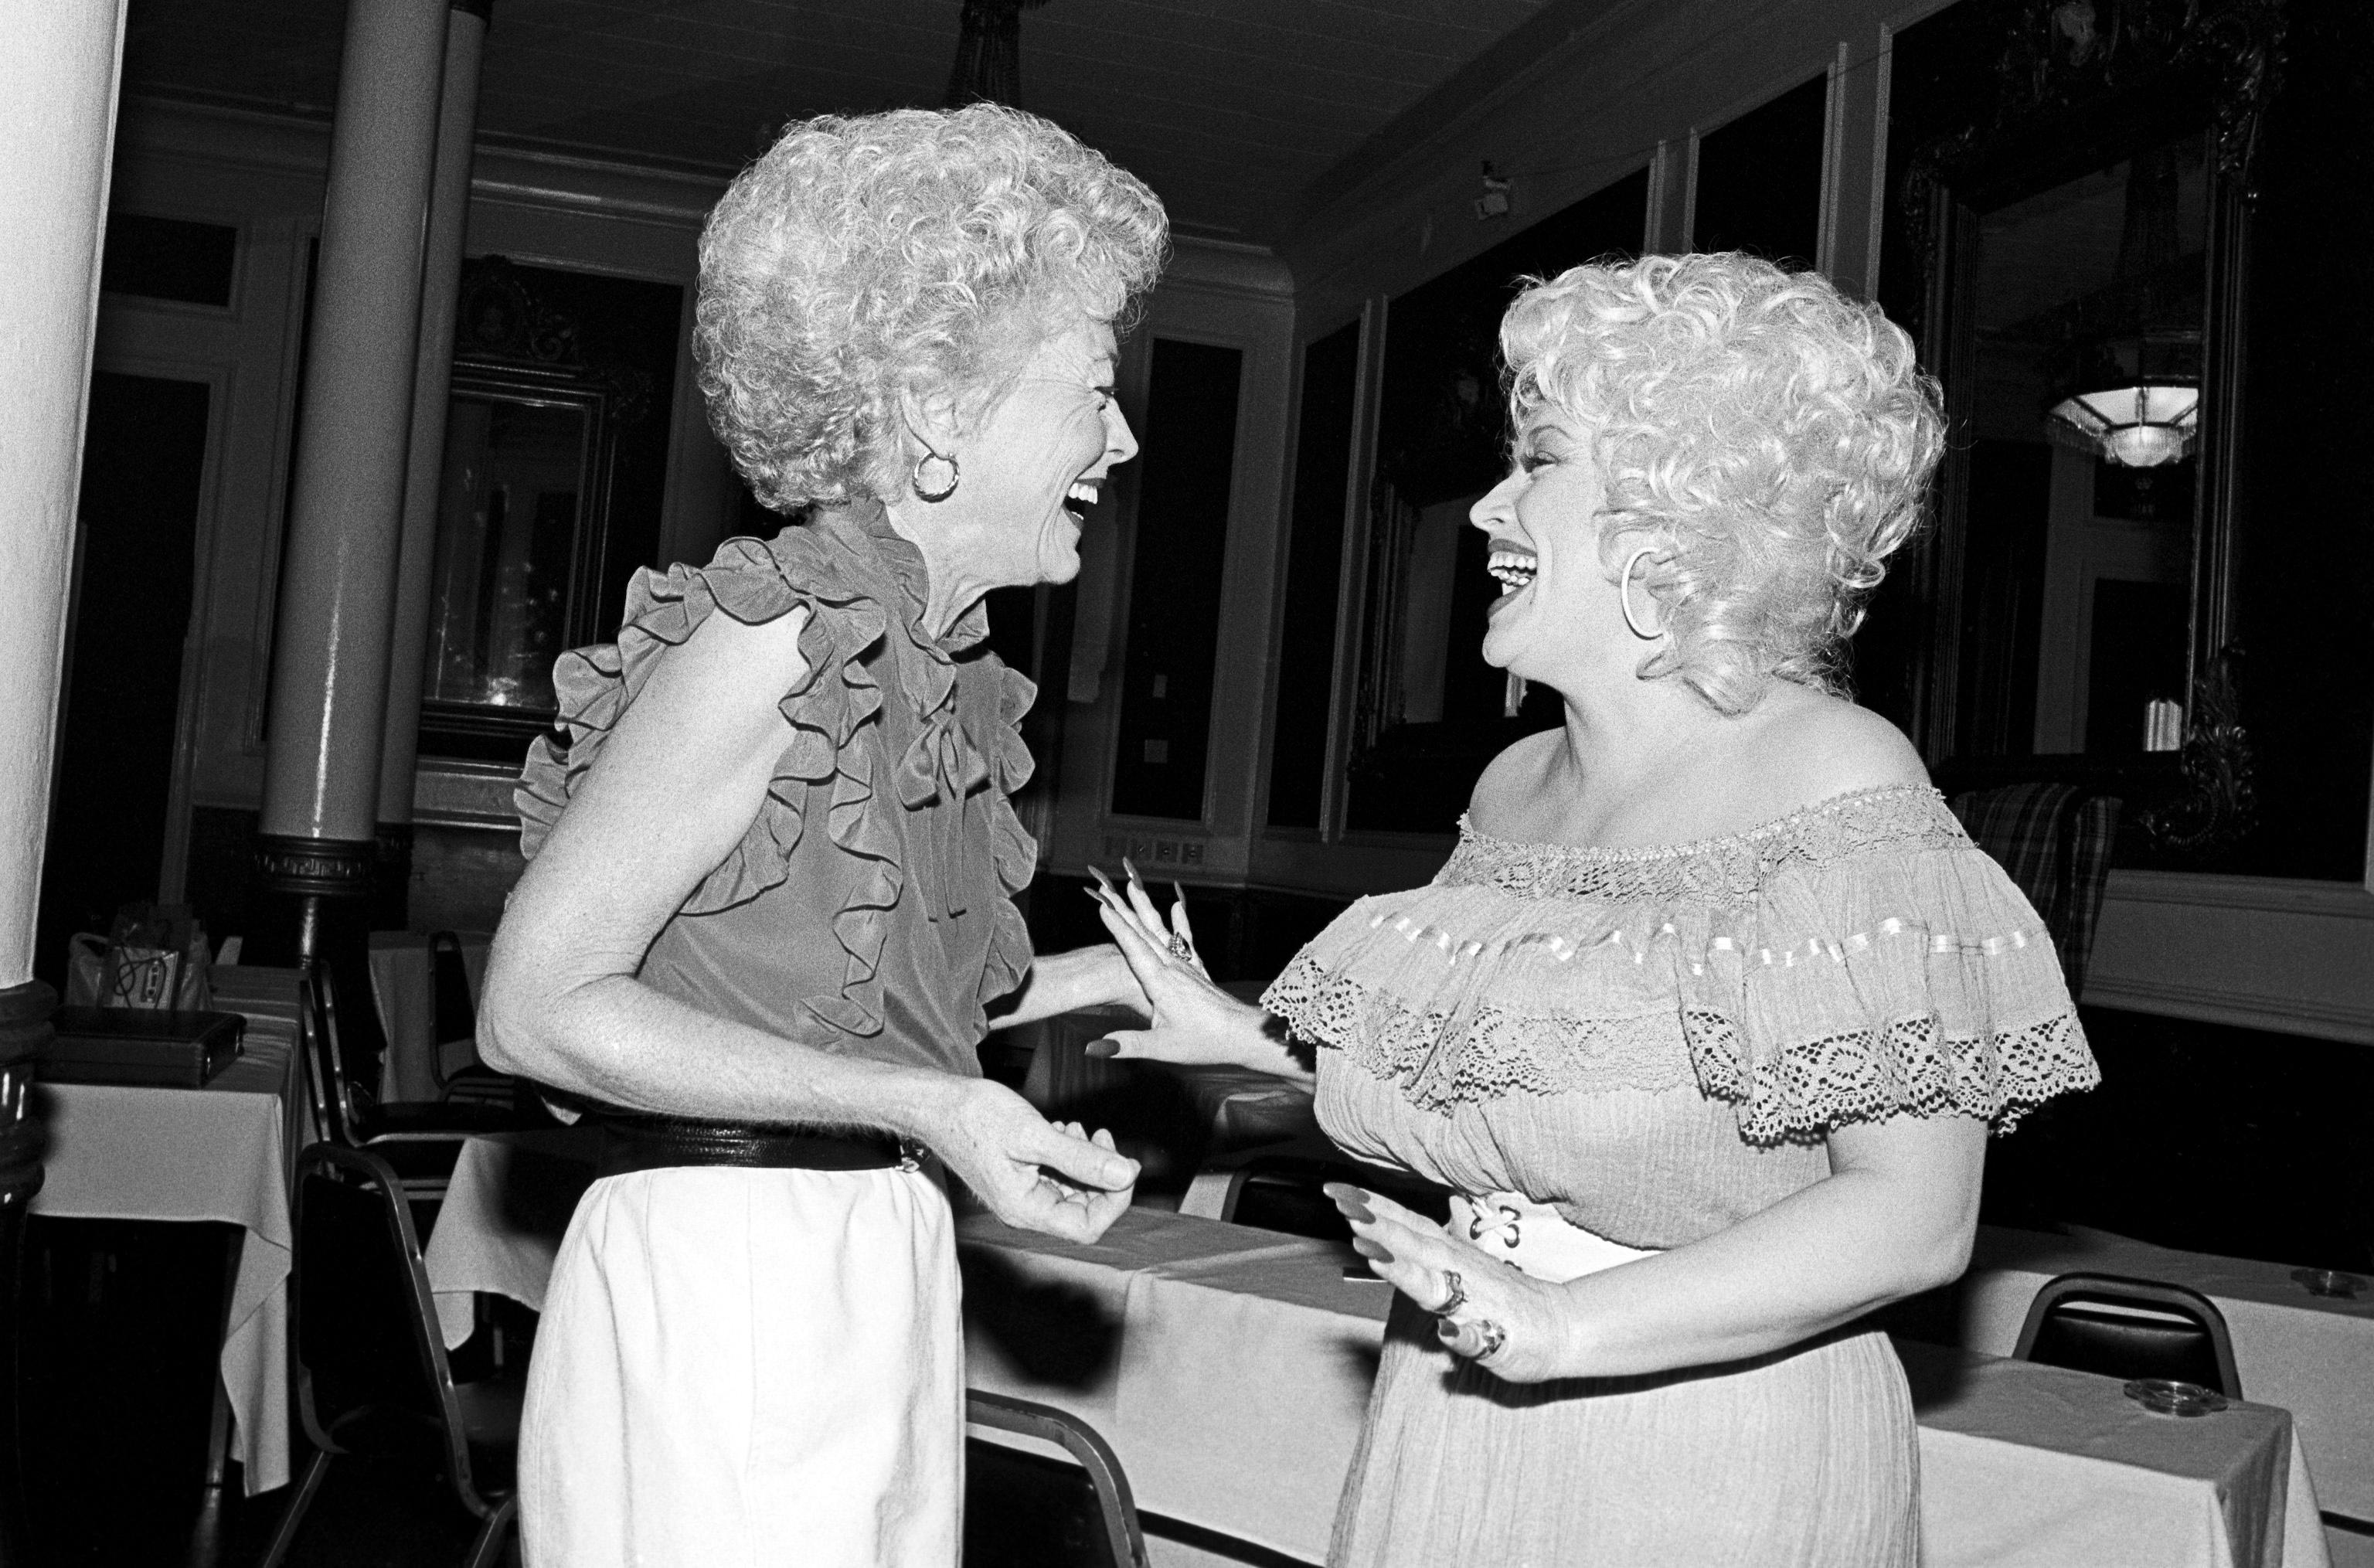 Texan politician and former Texas governor, Ann Richards with Dolly Parton taken at the Driskill Hotel, Austin Texas in 1982 by photographer Scott Newton

Photographers notes: We were on a shoot for Ann's first State Treasurer race, and, as I